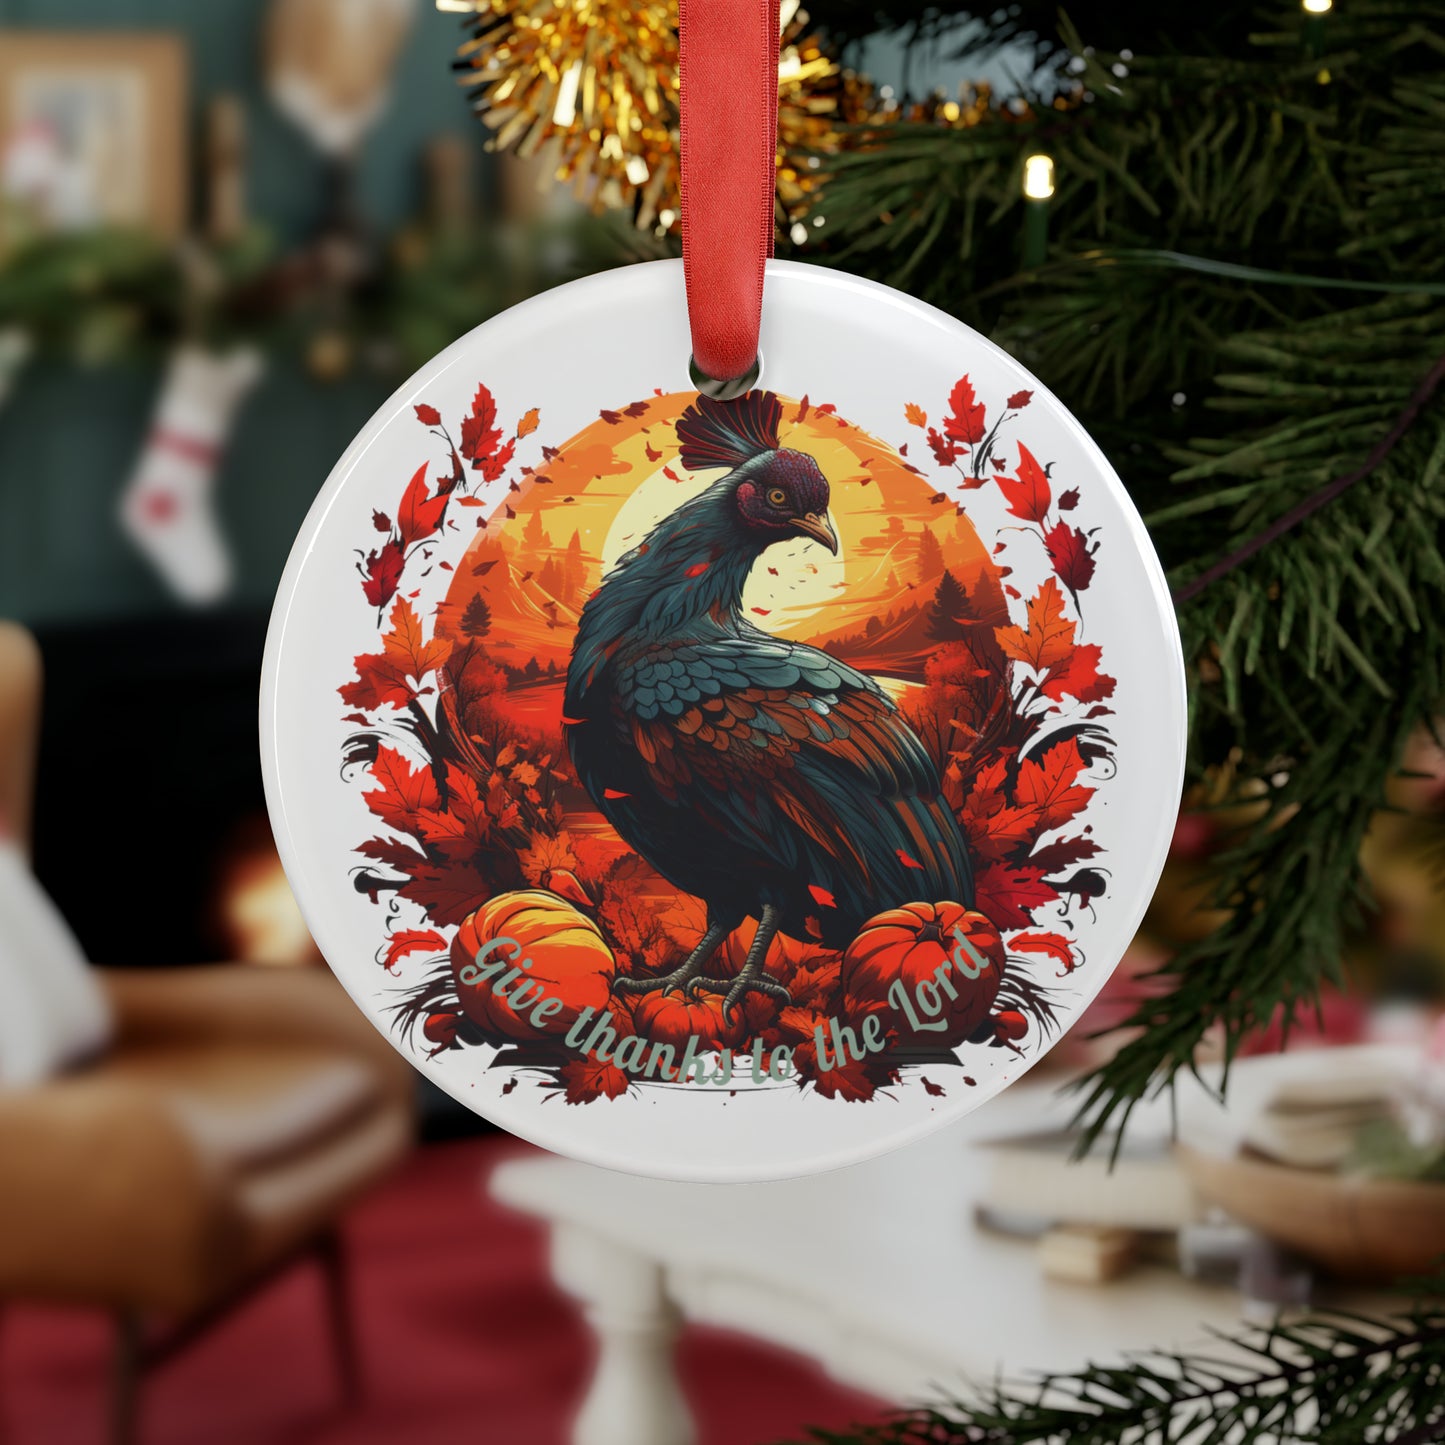 Give thanks 3 / Acrylic Ornament with Ribbon